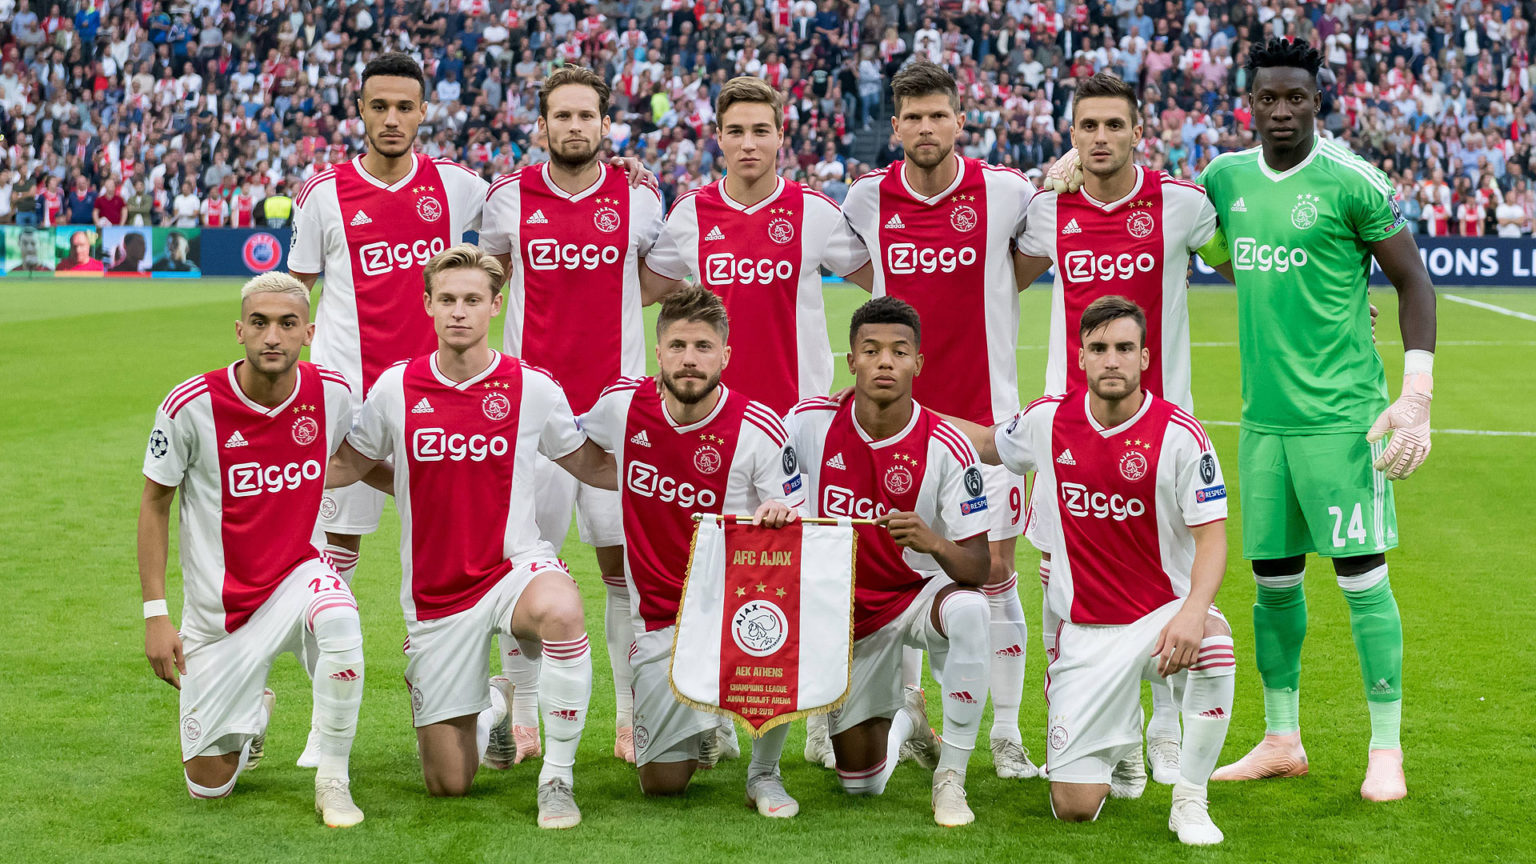 ajax-history-ownership-squad-members-support-staff-and-honors